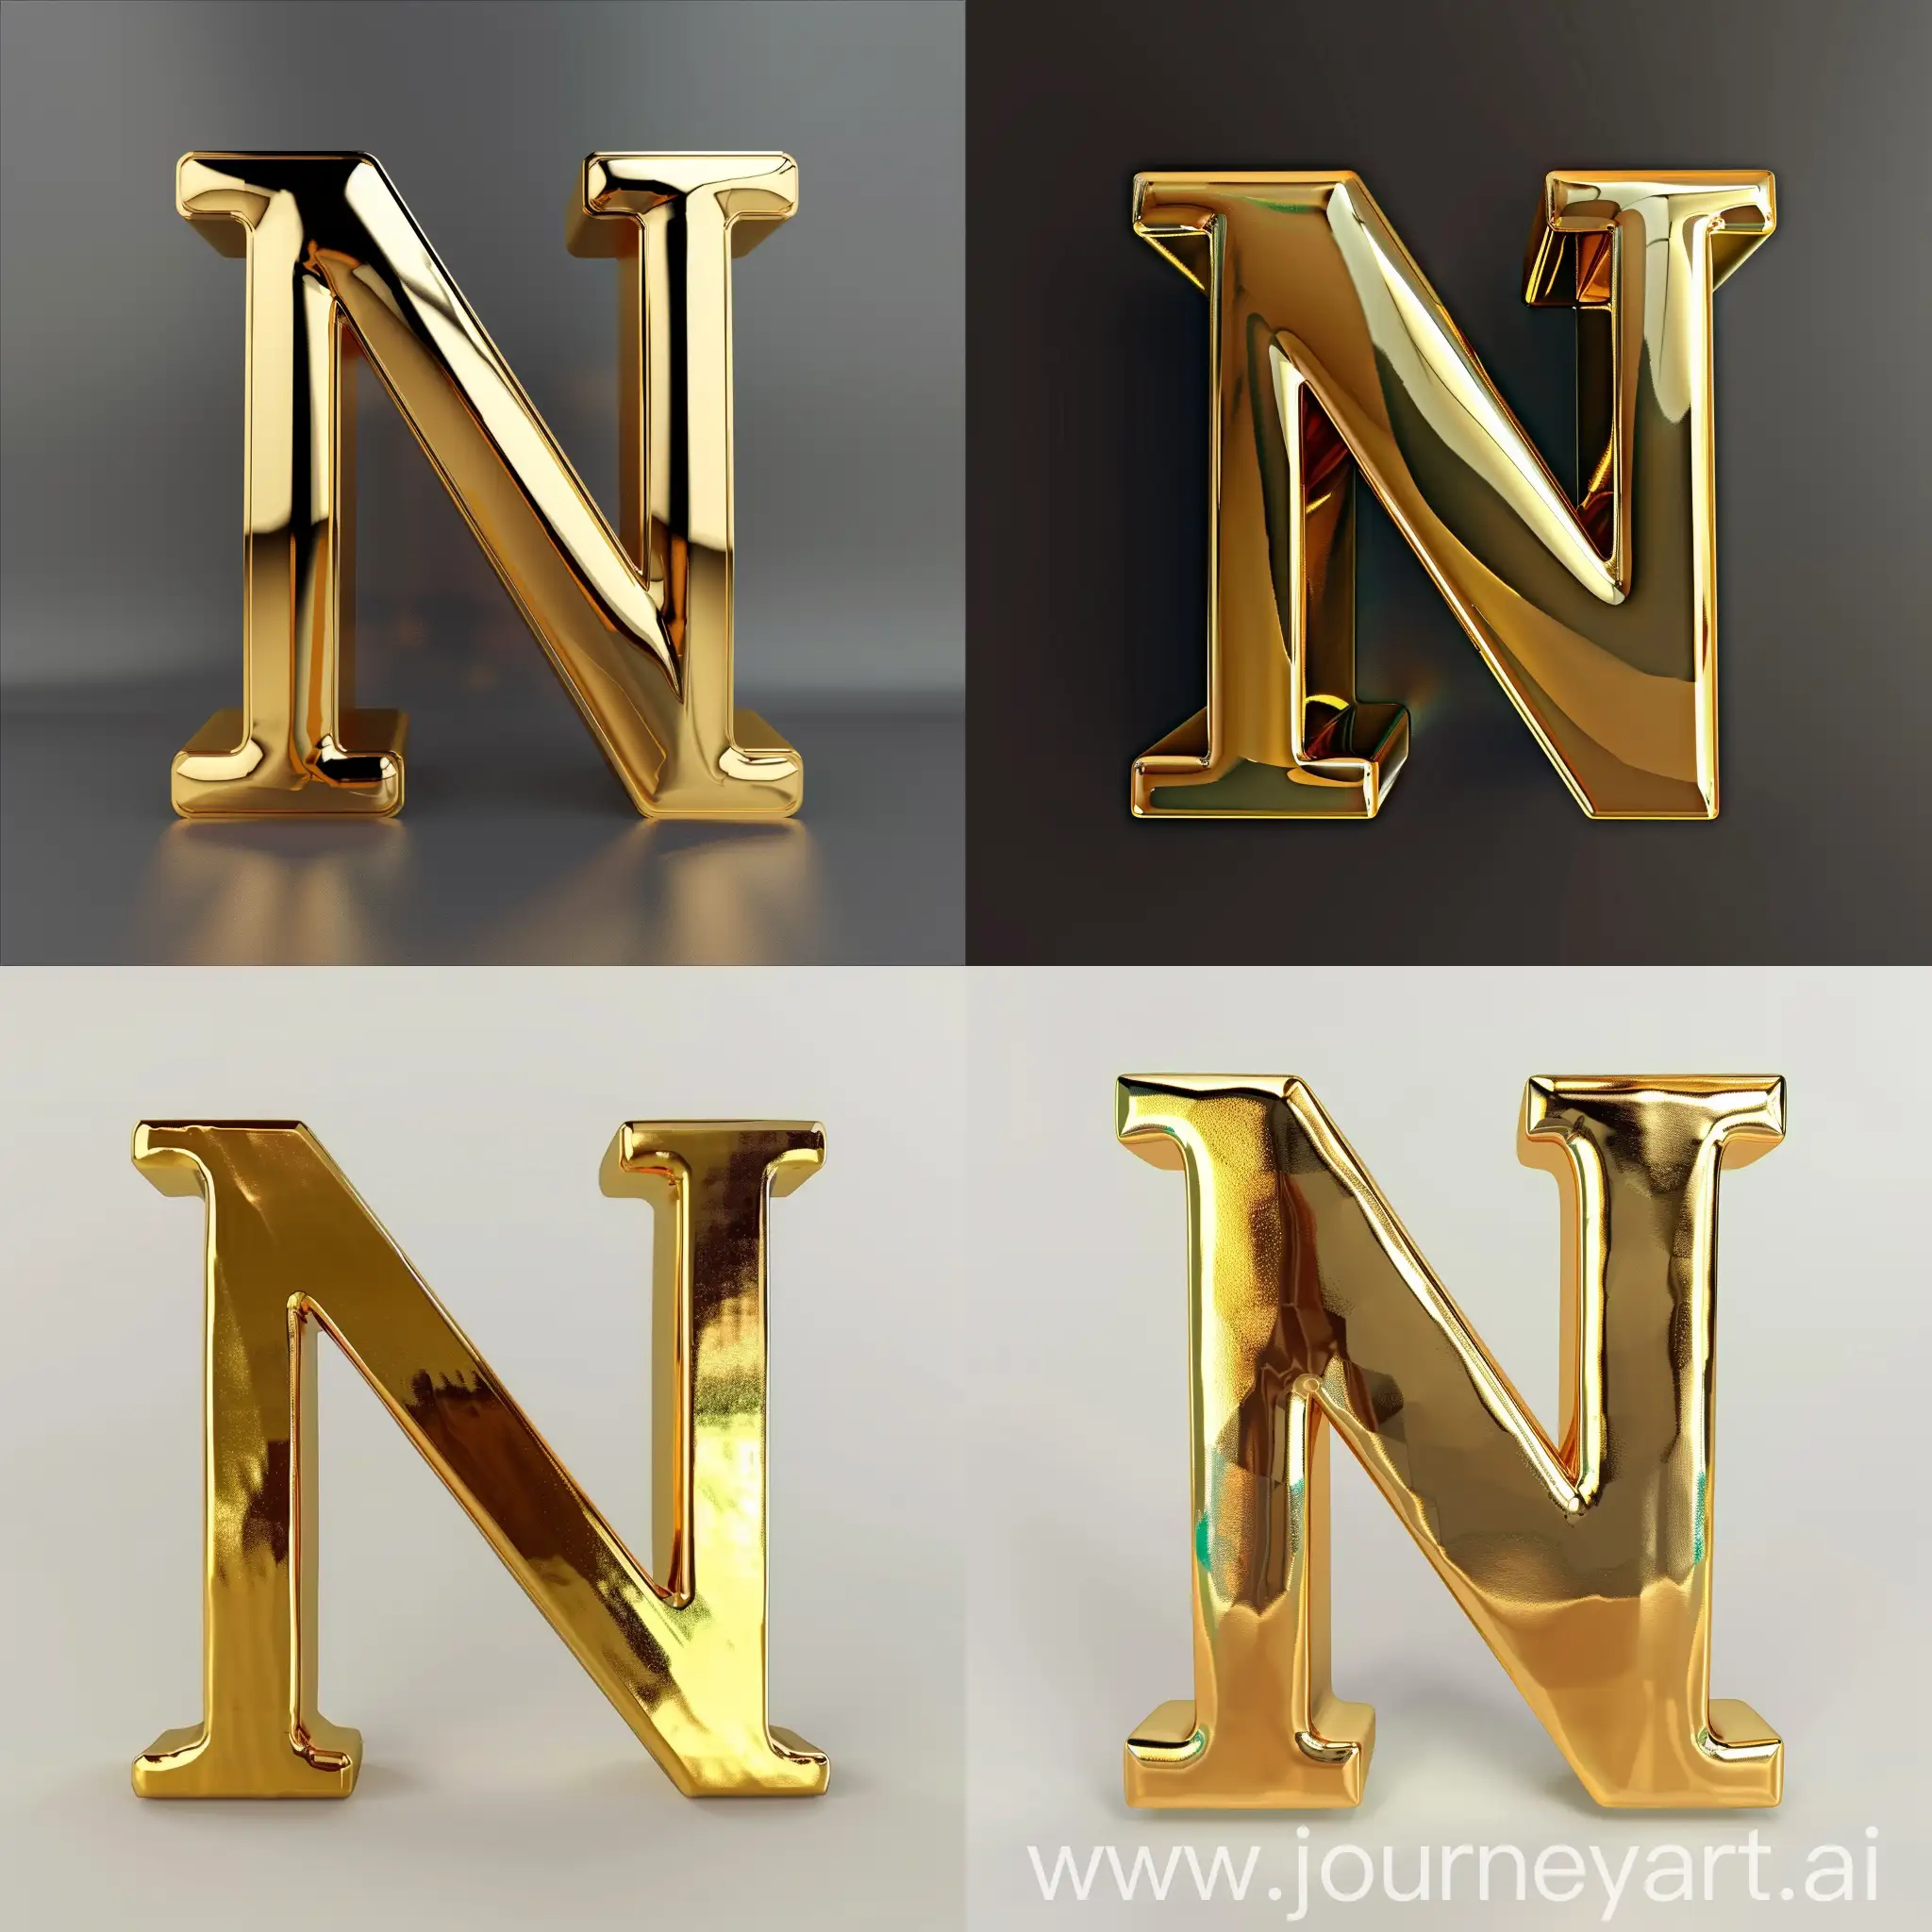 Design a golden 3D logo for me with the letter N, exactly like the Microsoft Bing brand logo